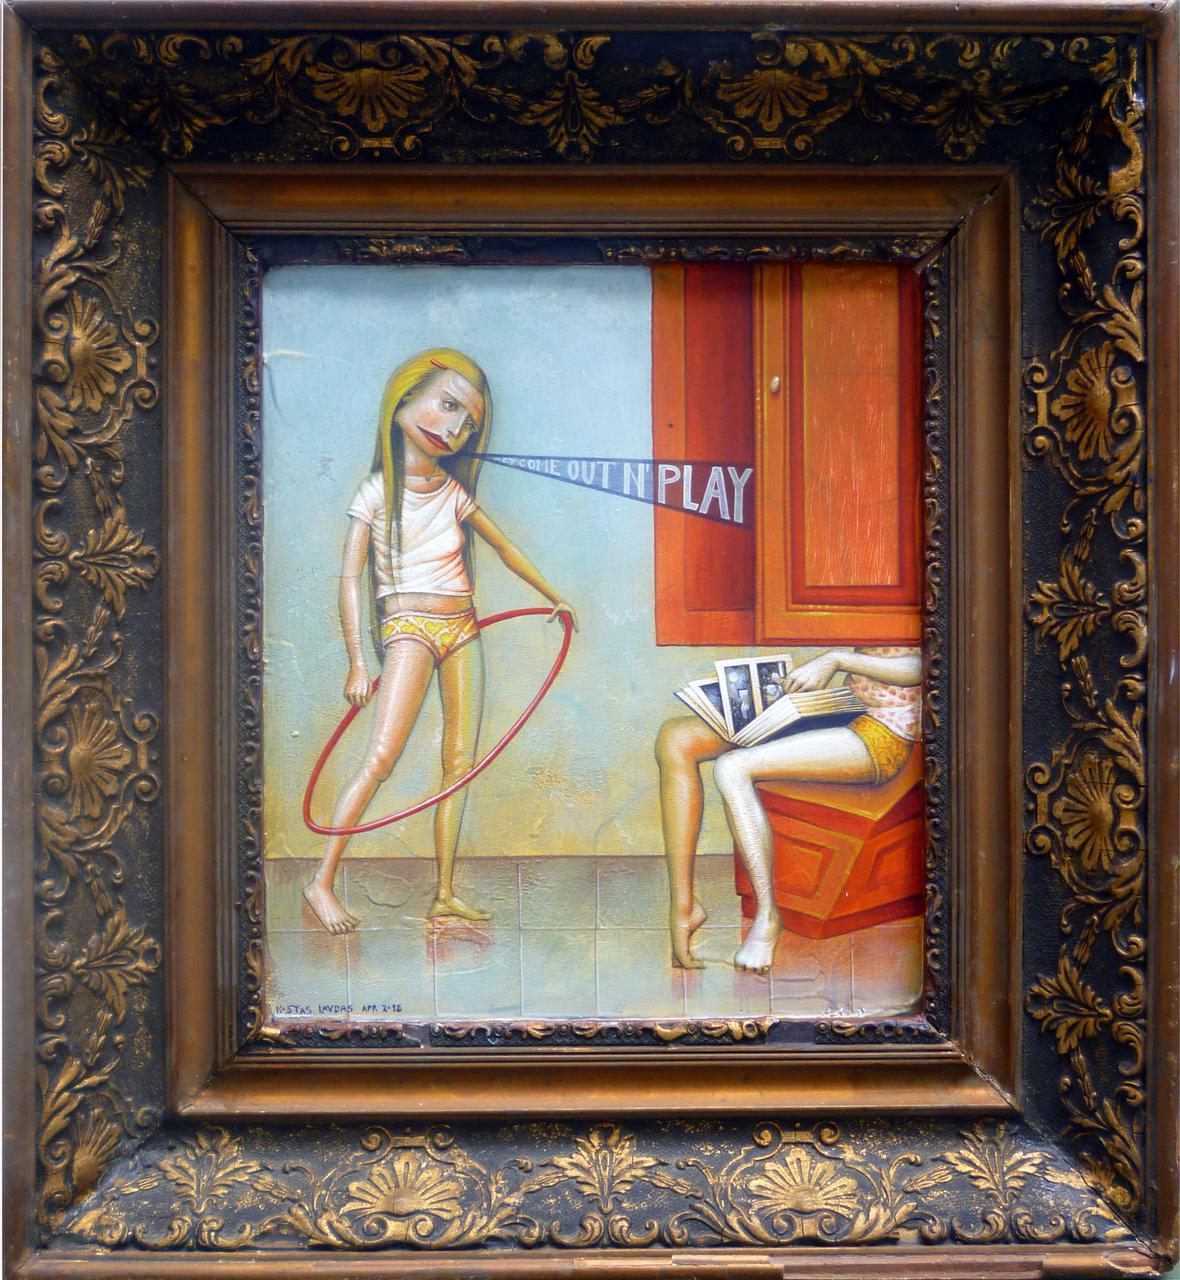 Kostas Lavdas, Come Out &lsquo;n&rsquo; Play, 42.5 x 46.5 cm, acrylic on wood 